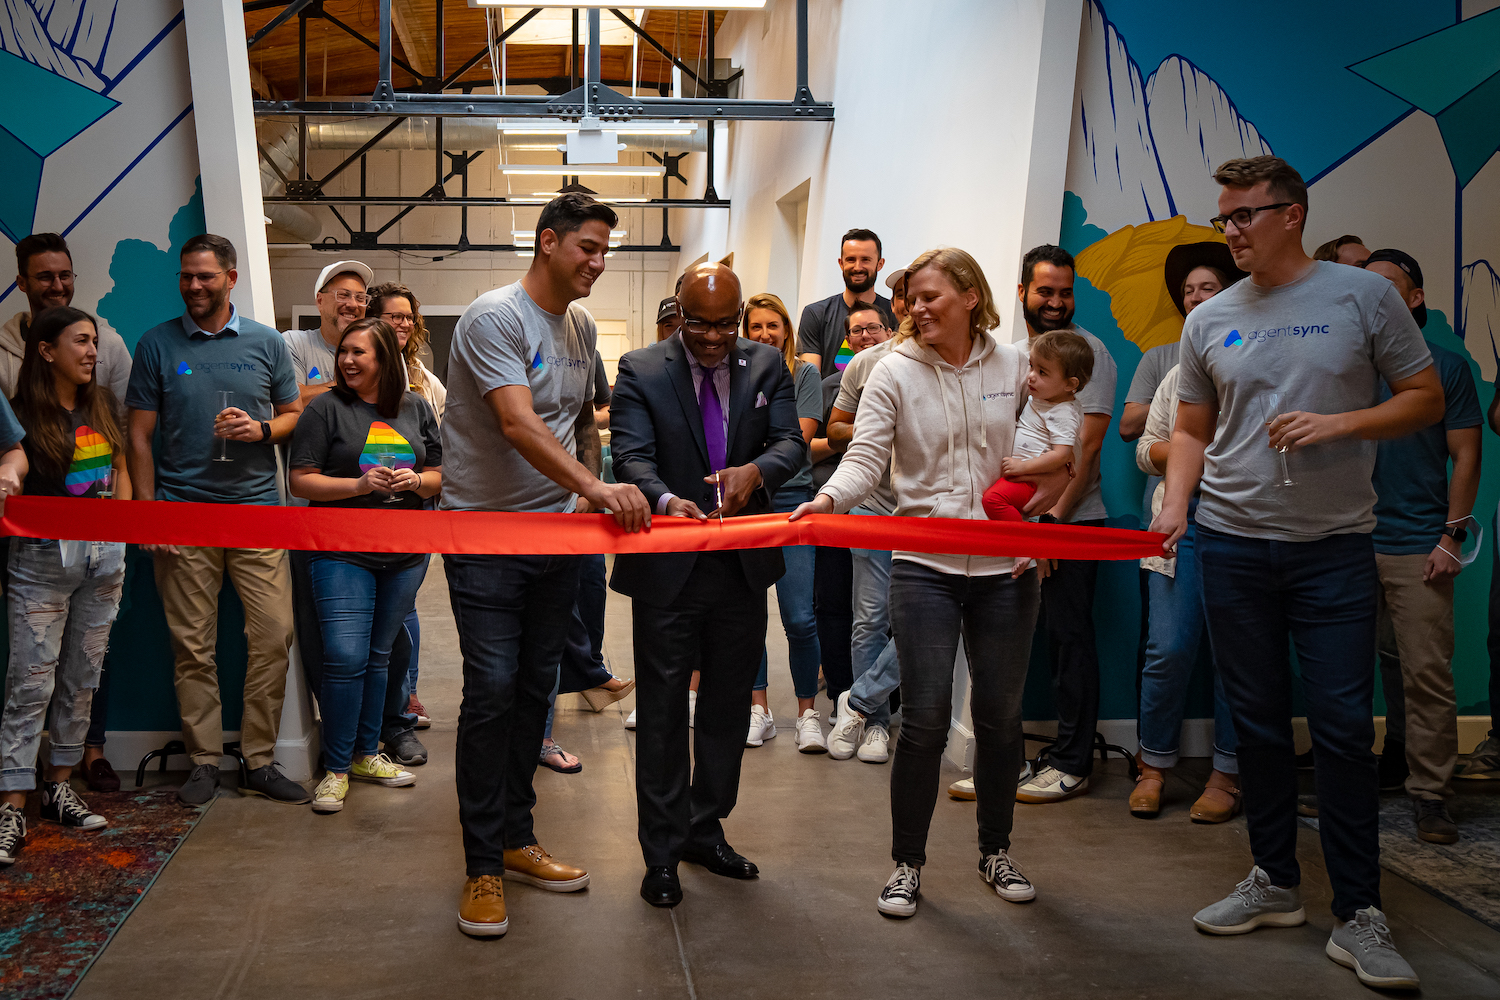 DENVER MAYOR MICHAEL HANCOCK ATTENDS A RIBBON-CUTTING CEREMONY AT AGENTSYNC'S NEW OFFICE.